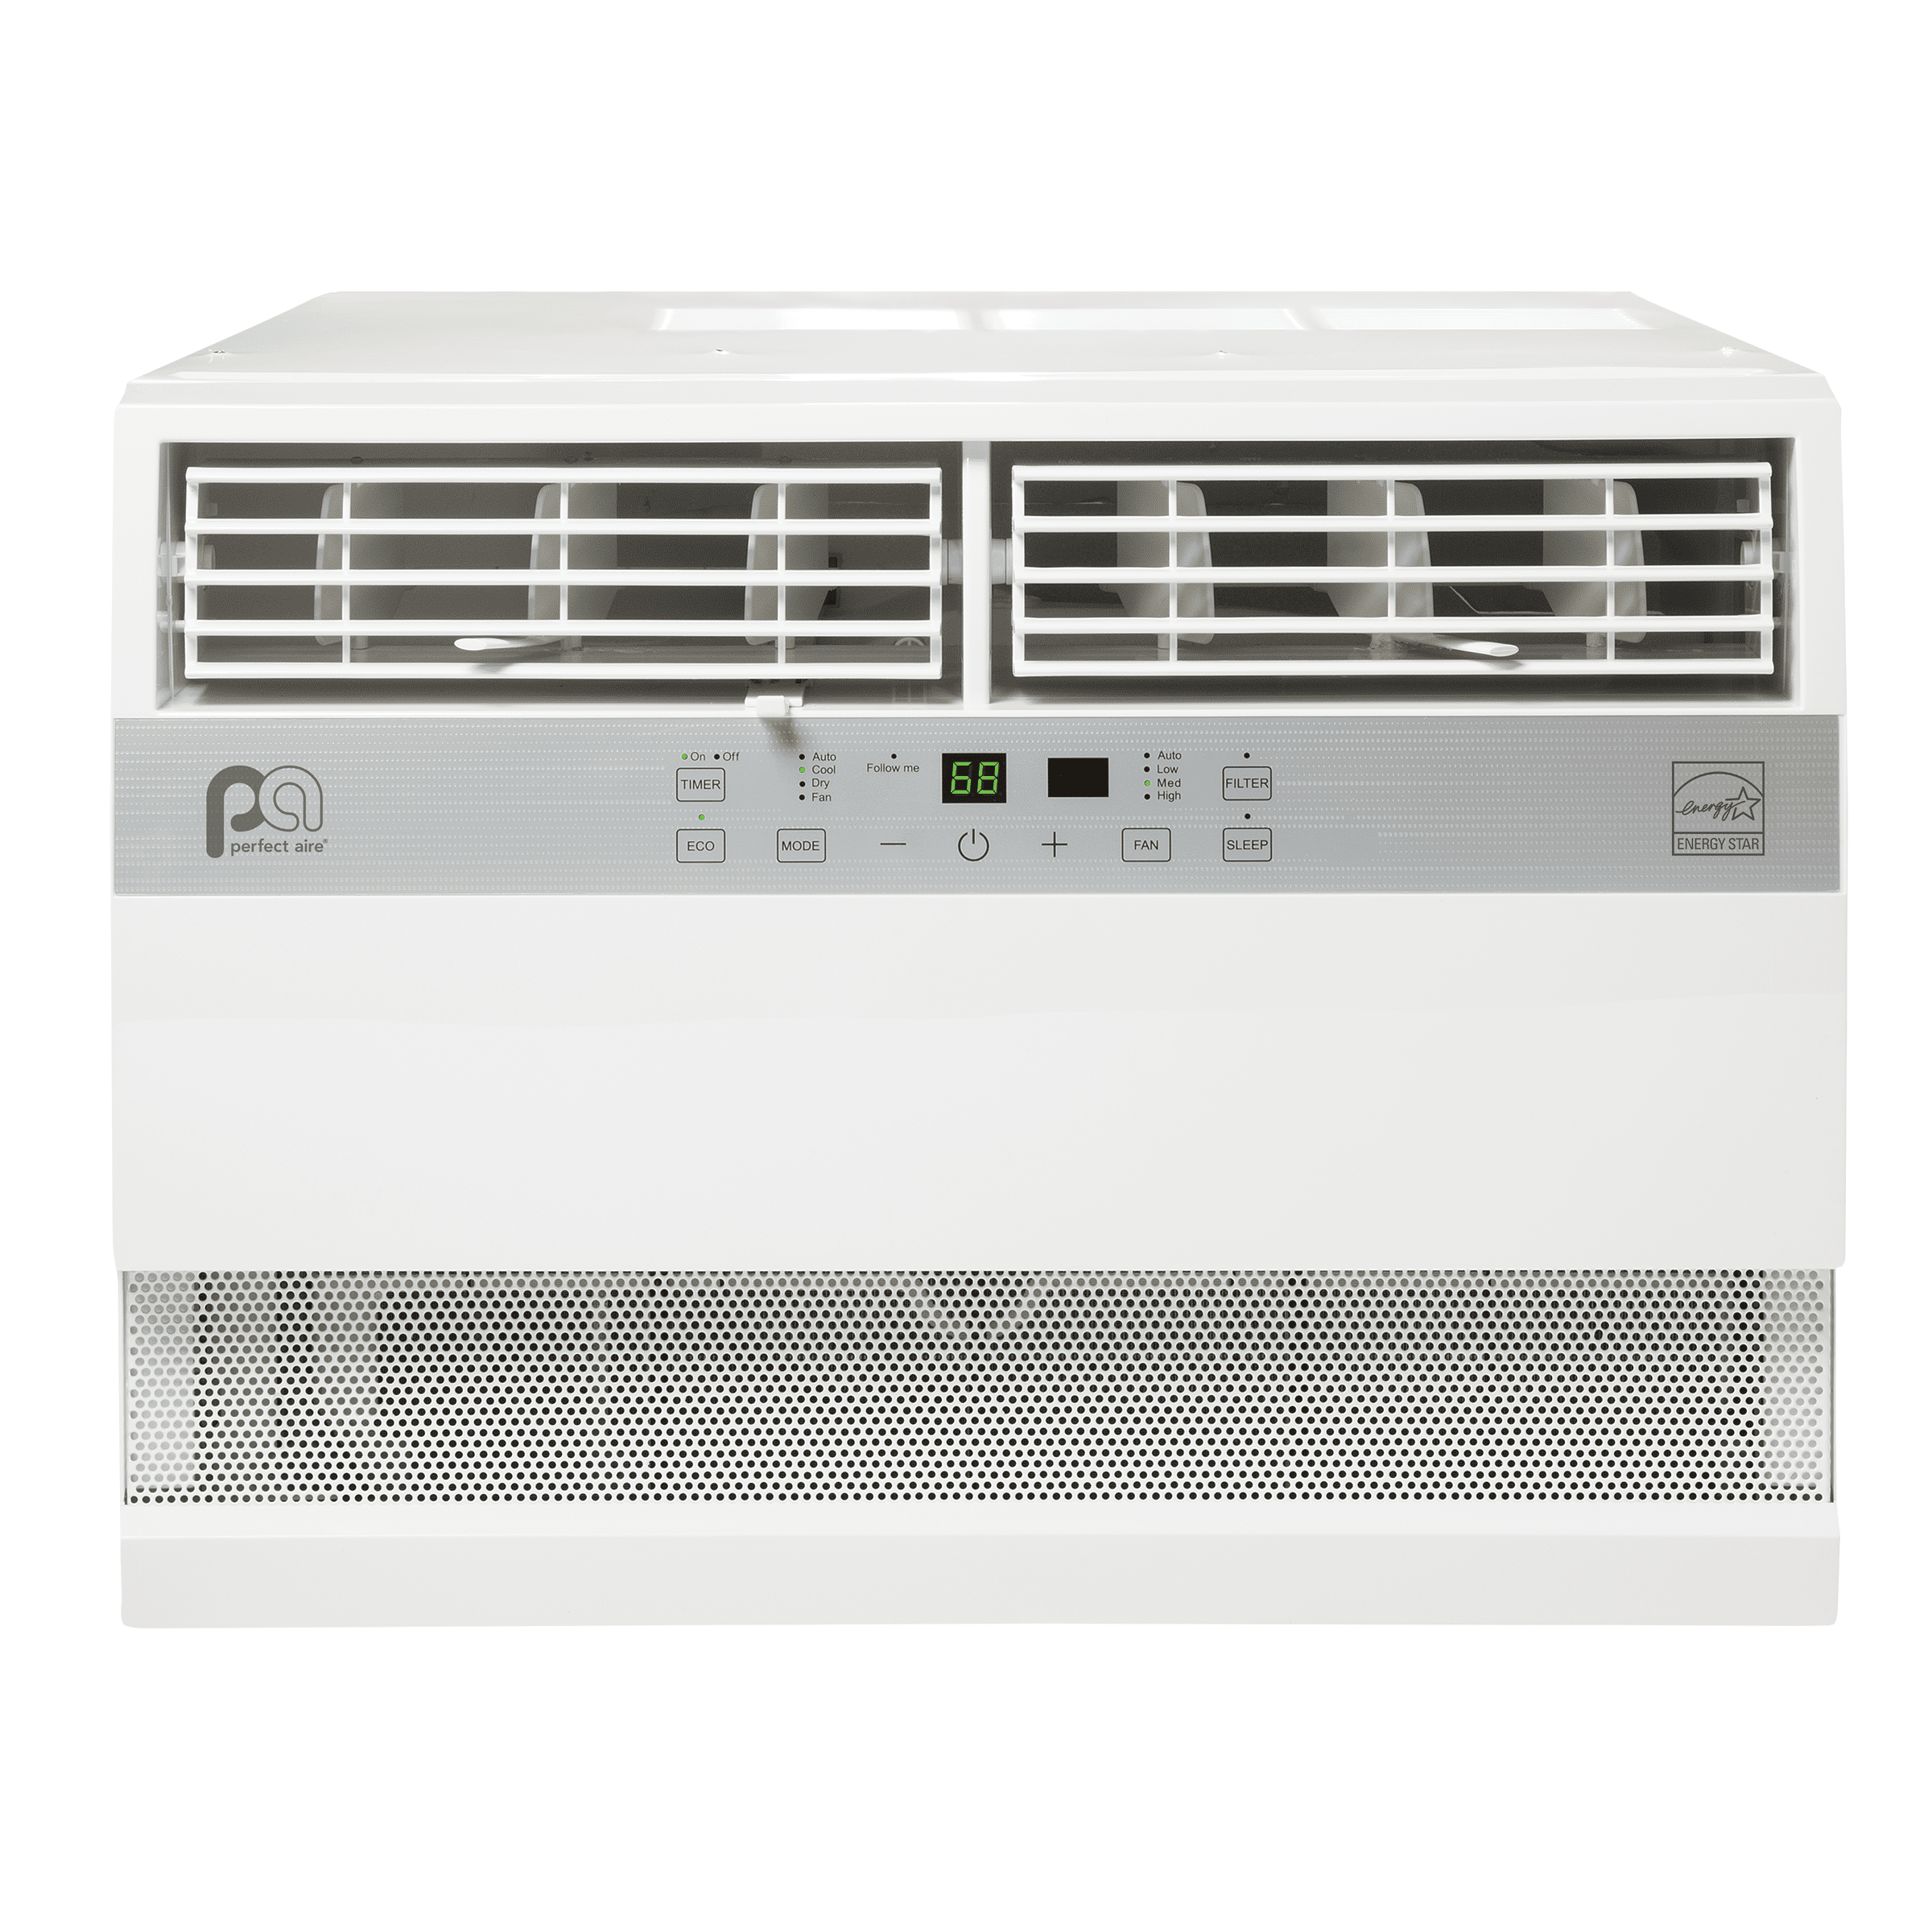 Picture of B&K Products 4538872 450 sq ft. 115V Perfect Aire 10000 BTU Window Air Conditioner with Remote Control